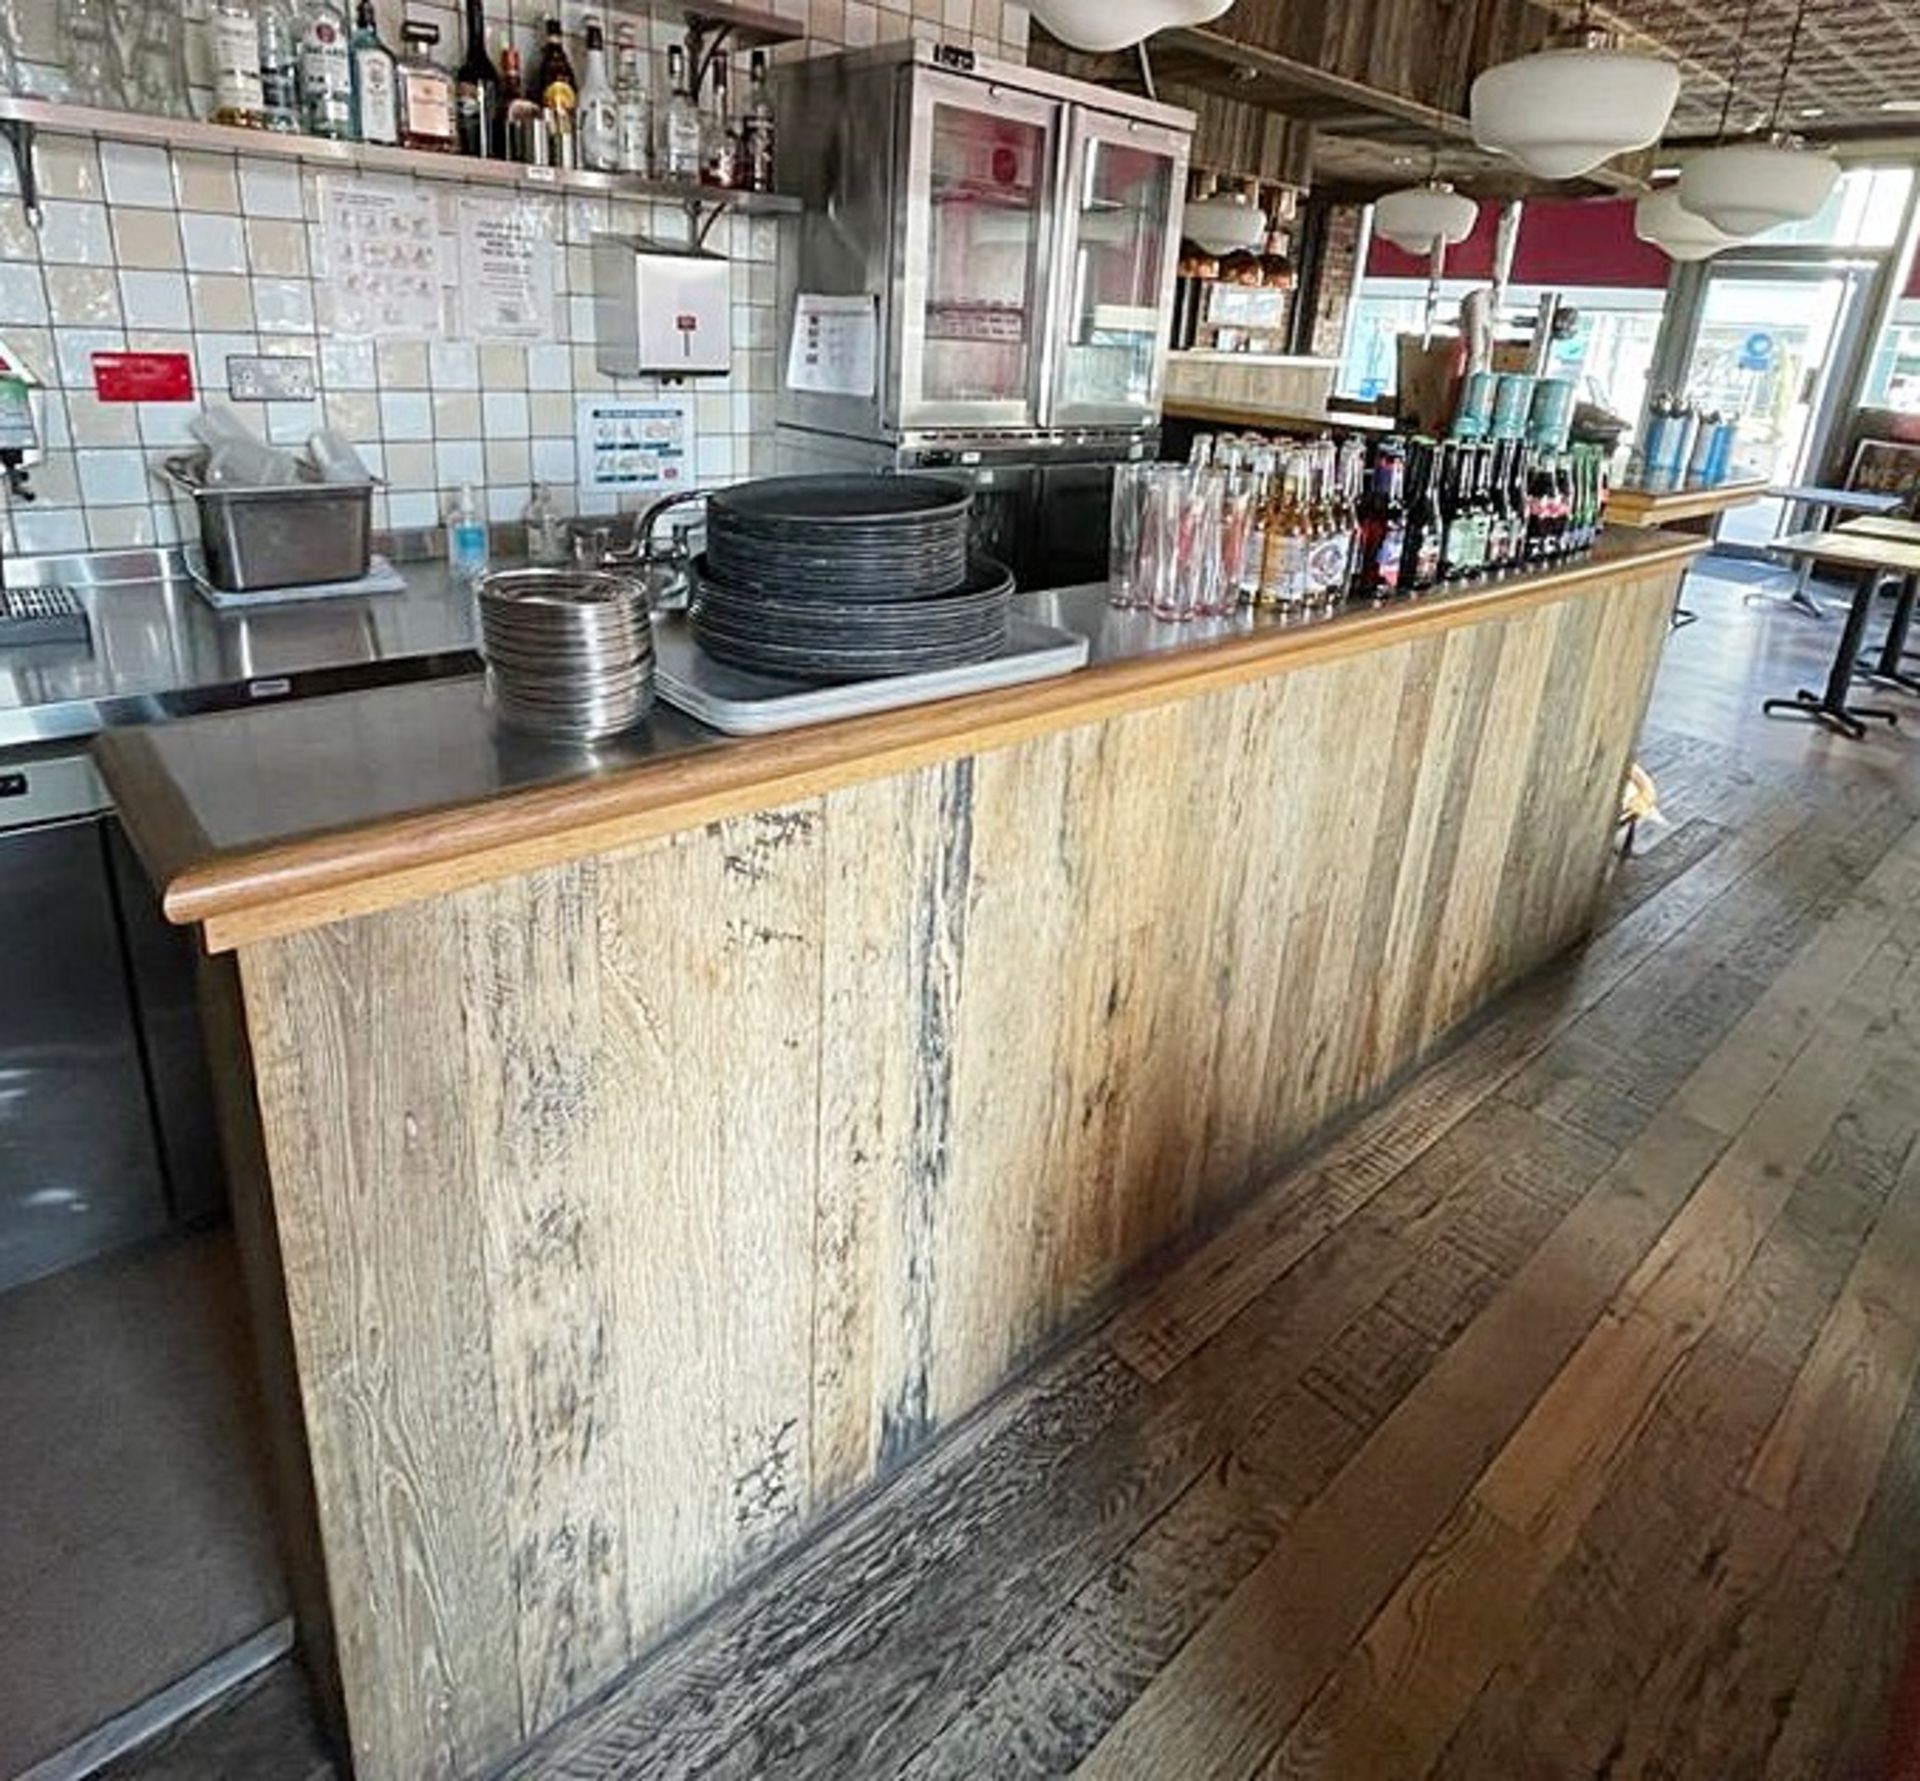 1 x Restaurant Bar With Reclaimed Timber Panelling - Dimensions: H120x600x500cm - BUYER TO REMOVE - Image 2 of 10